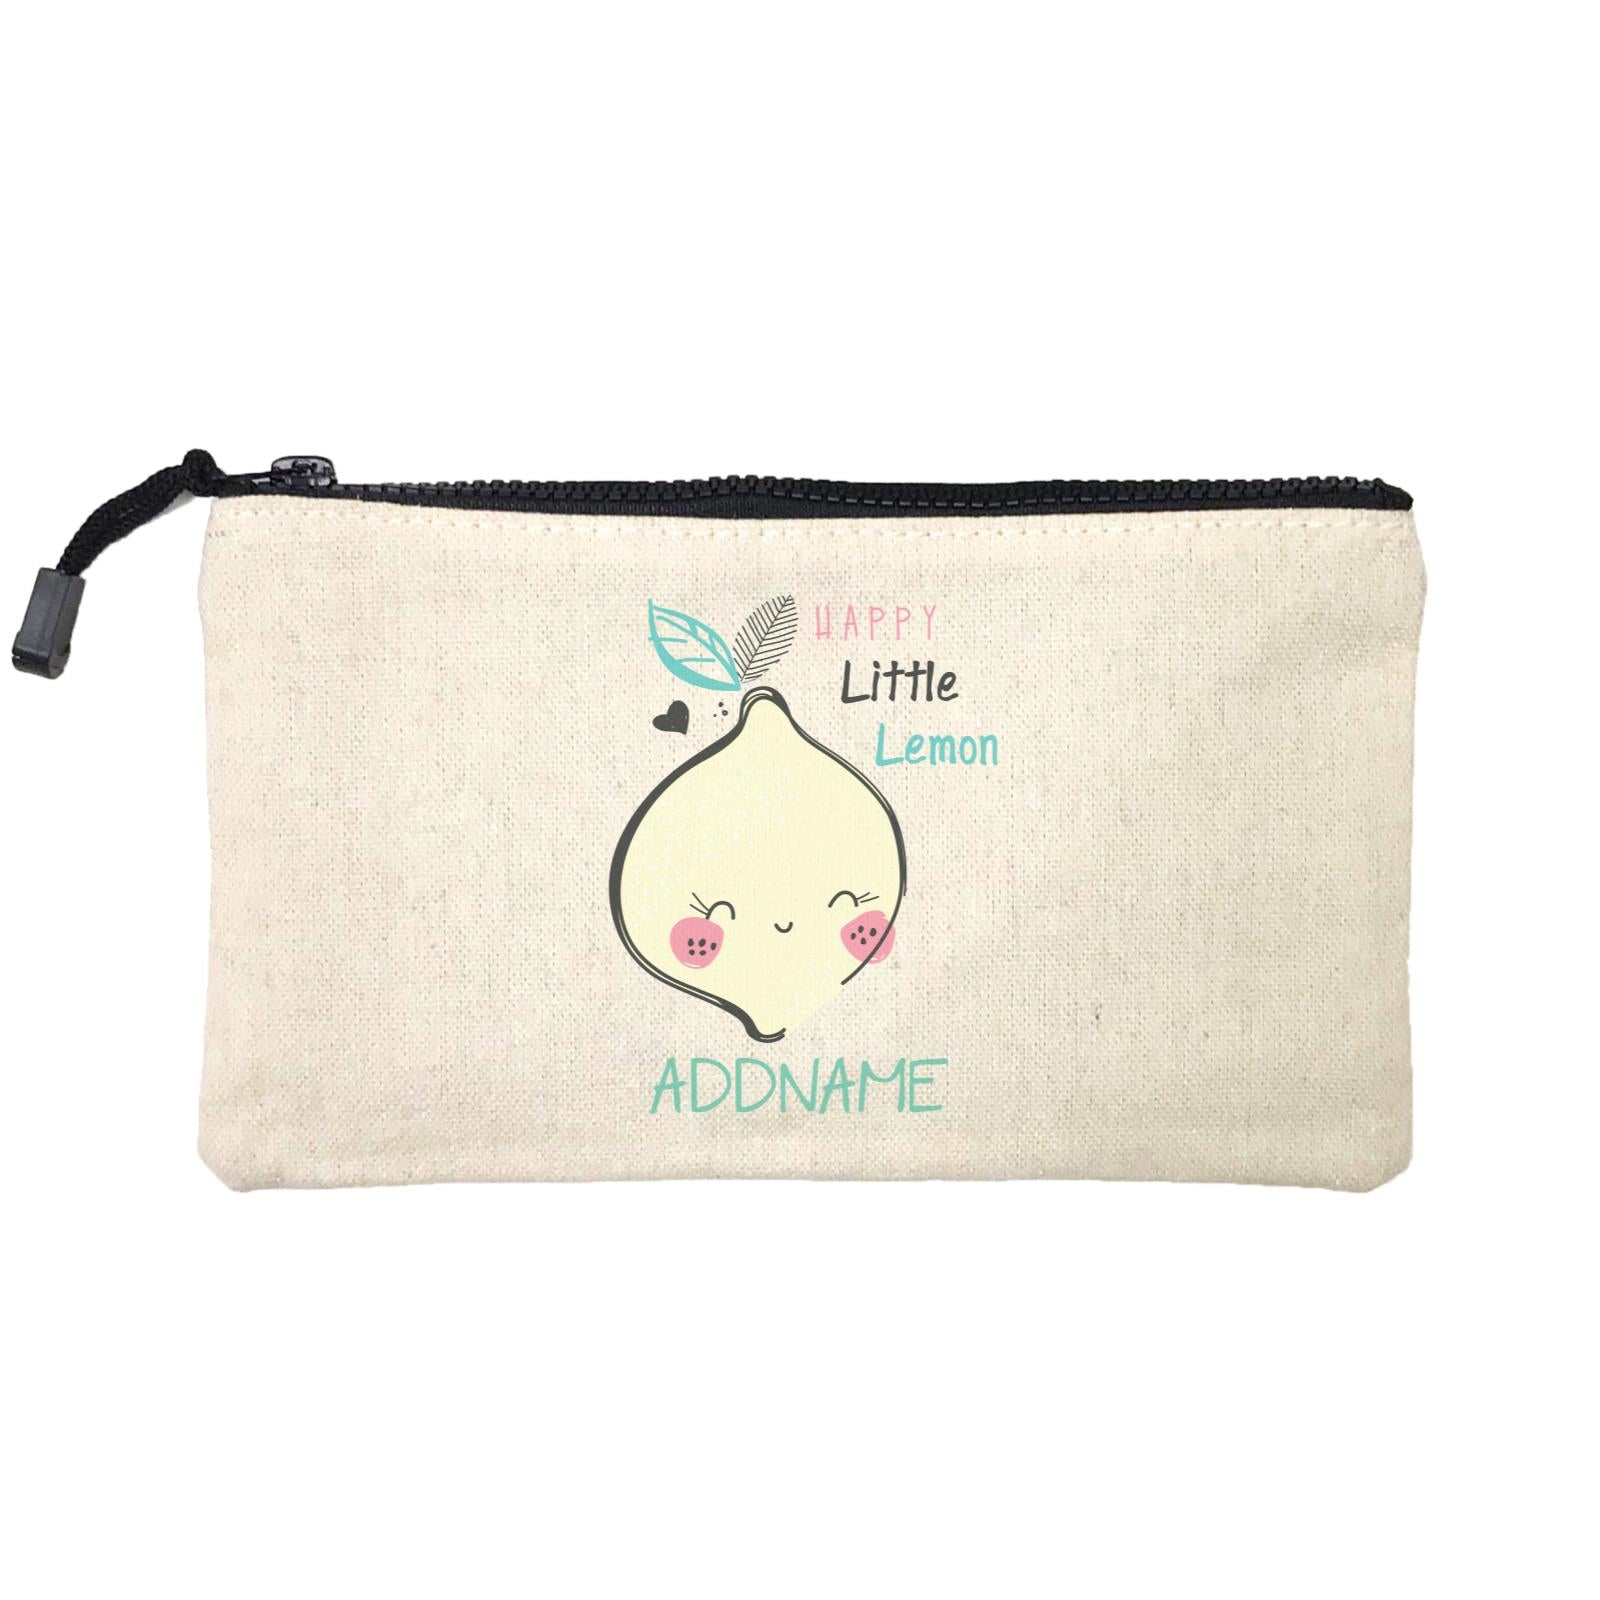 Cool Vibrant Series Happy Little Lemon Addname Mini Accessories Stationery Pouch